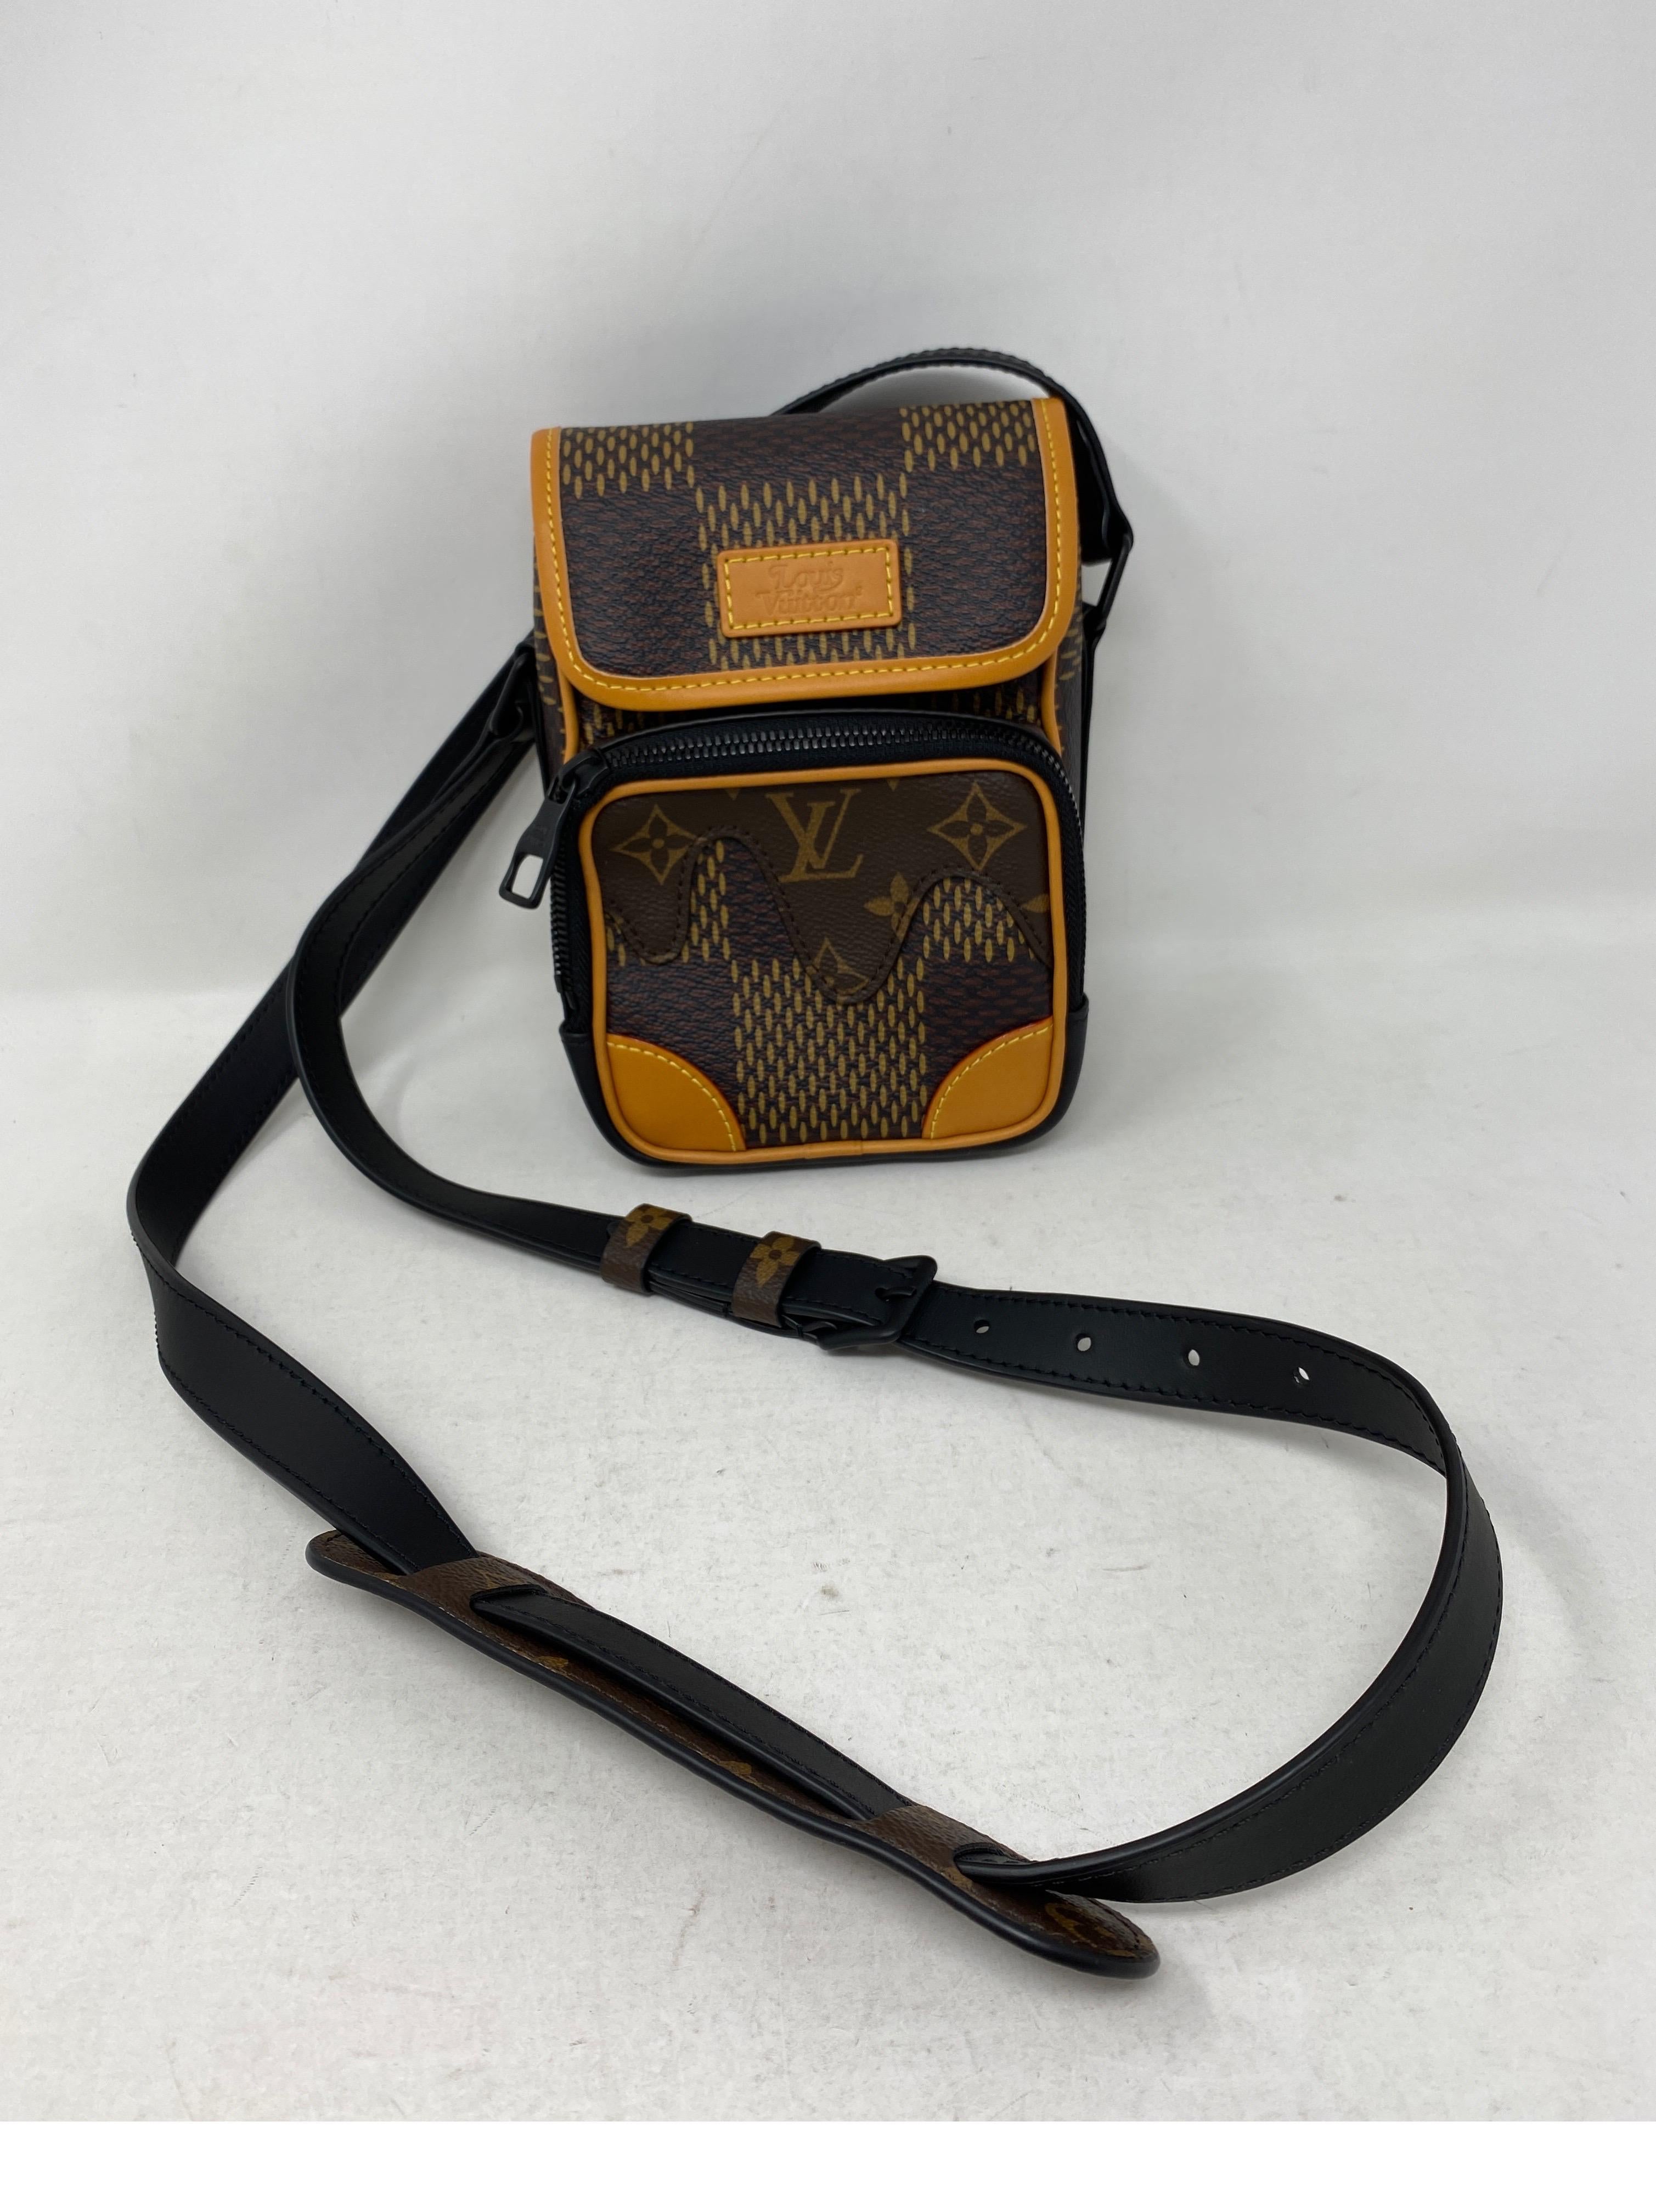 Louis Vuitton Limited Edition Crossbody Bag. New condition. Never used. Rare collector's piece. Can fit a phone and a few more things. Add to your limited LV collection. Guaranteed authentic. 